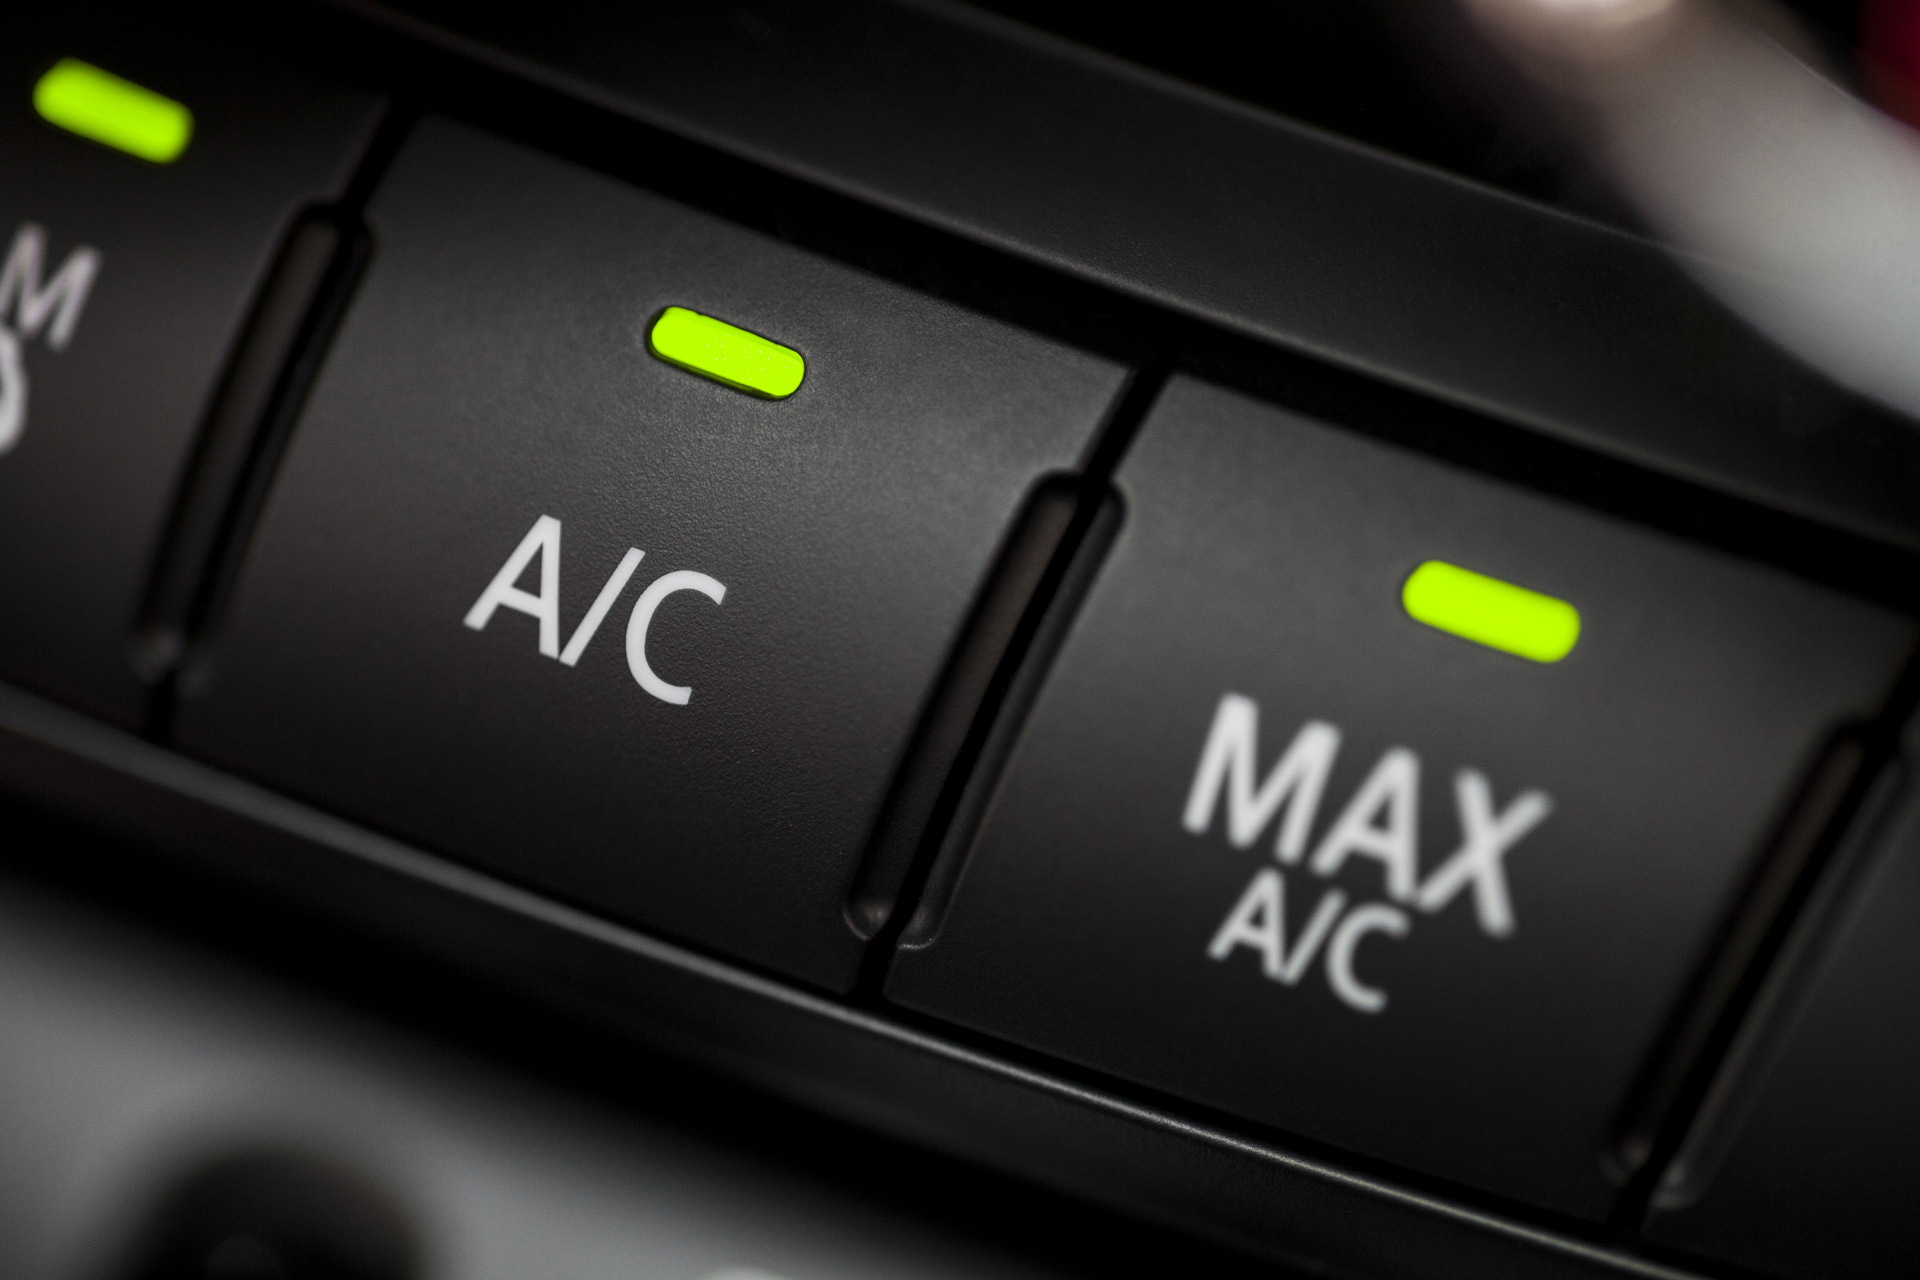 Color detail with the air conditioning button inside a car.
** Note: Shallow depth of field